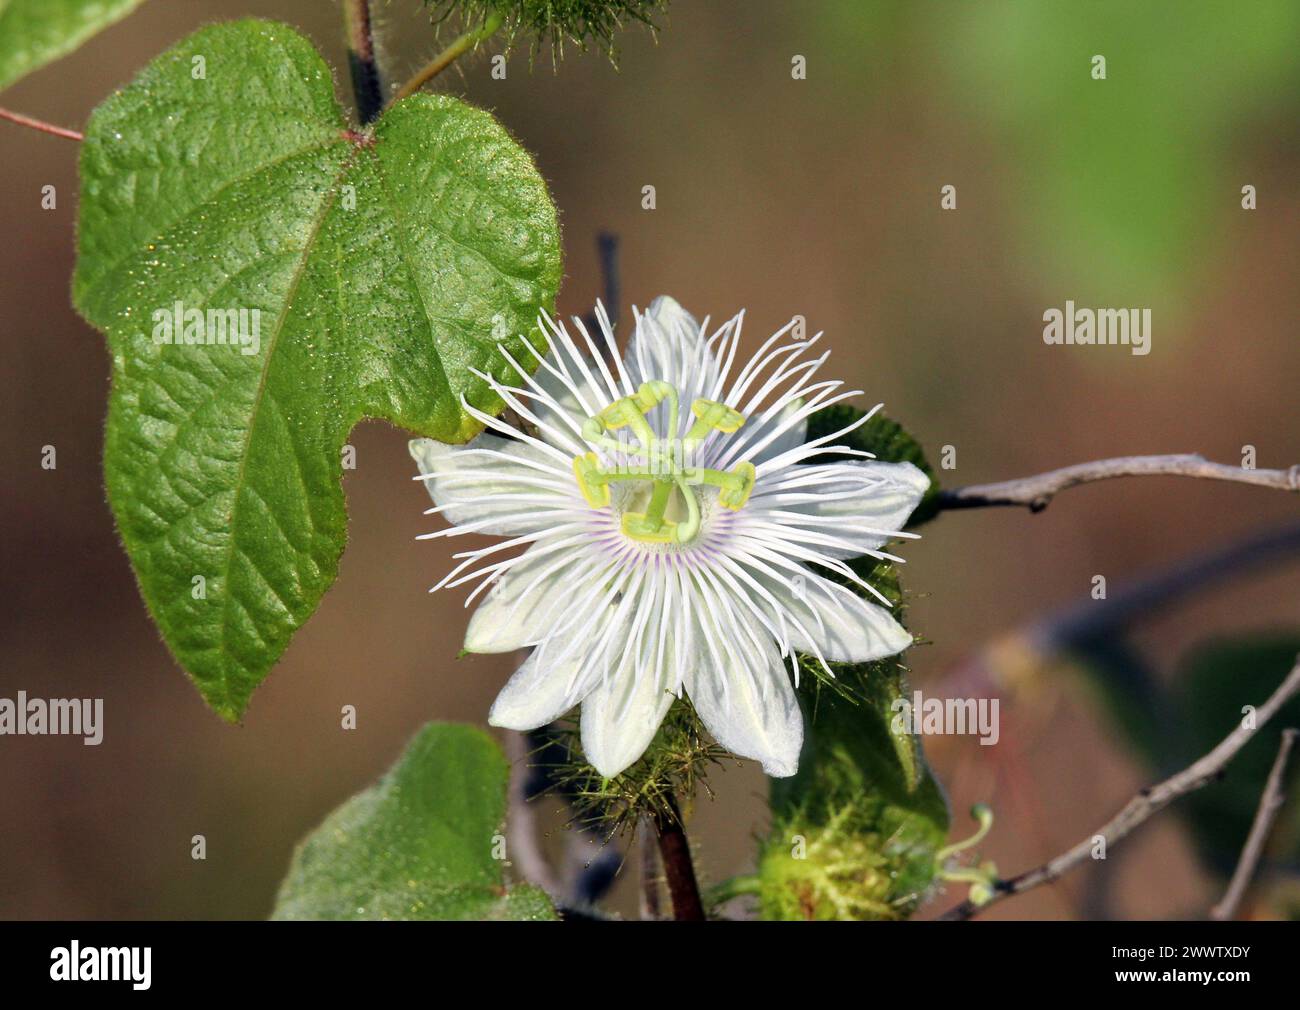 White flower on a Passiflora foetida (Passionflower) plant in a garden Stock Photo